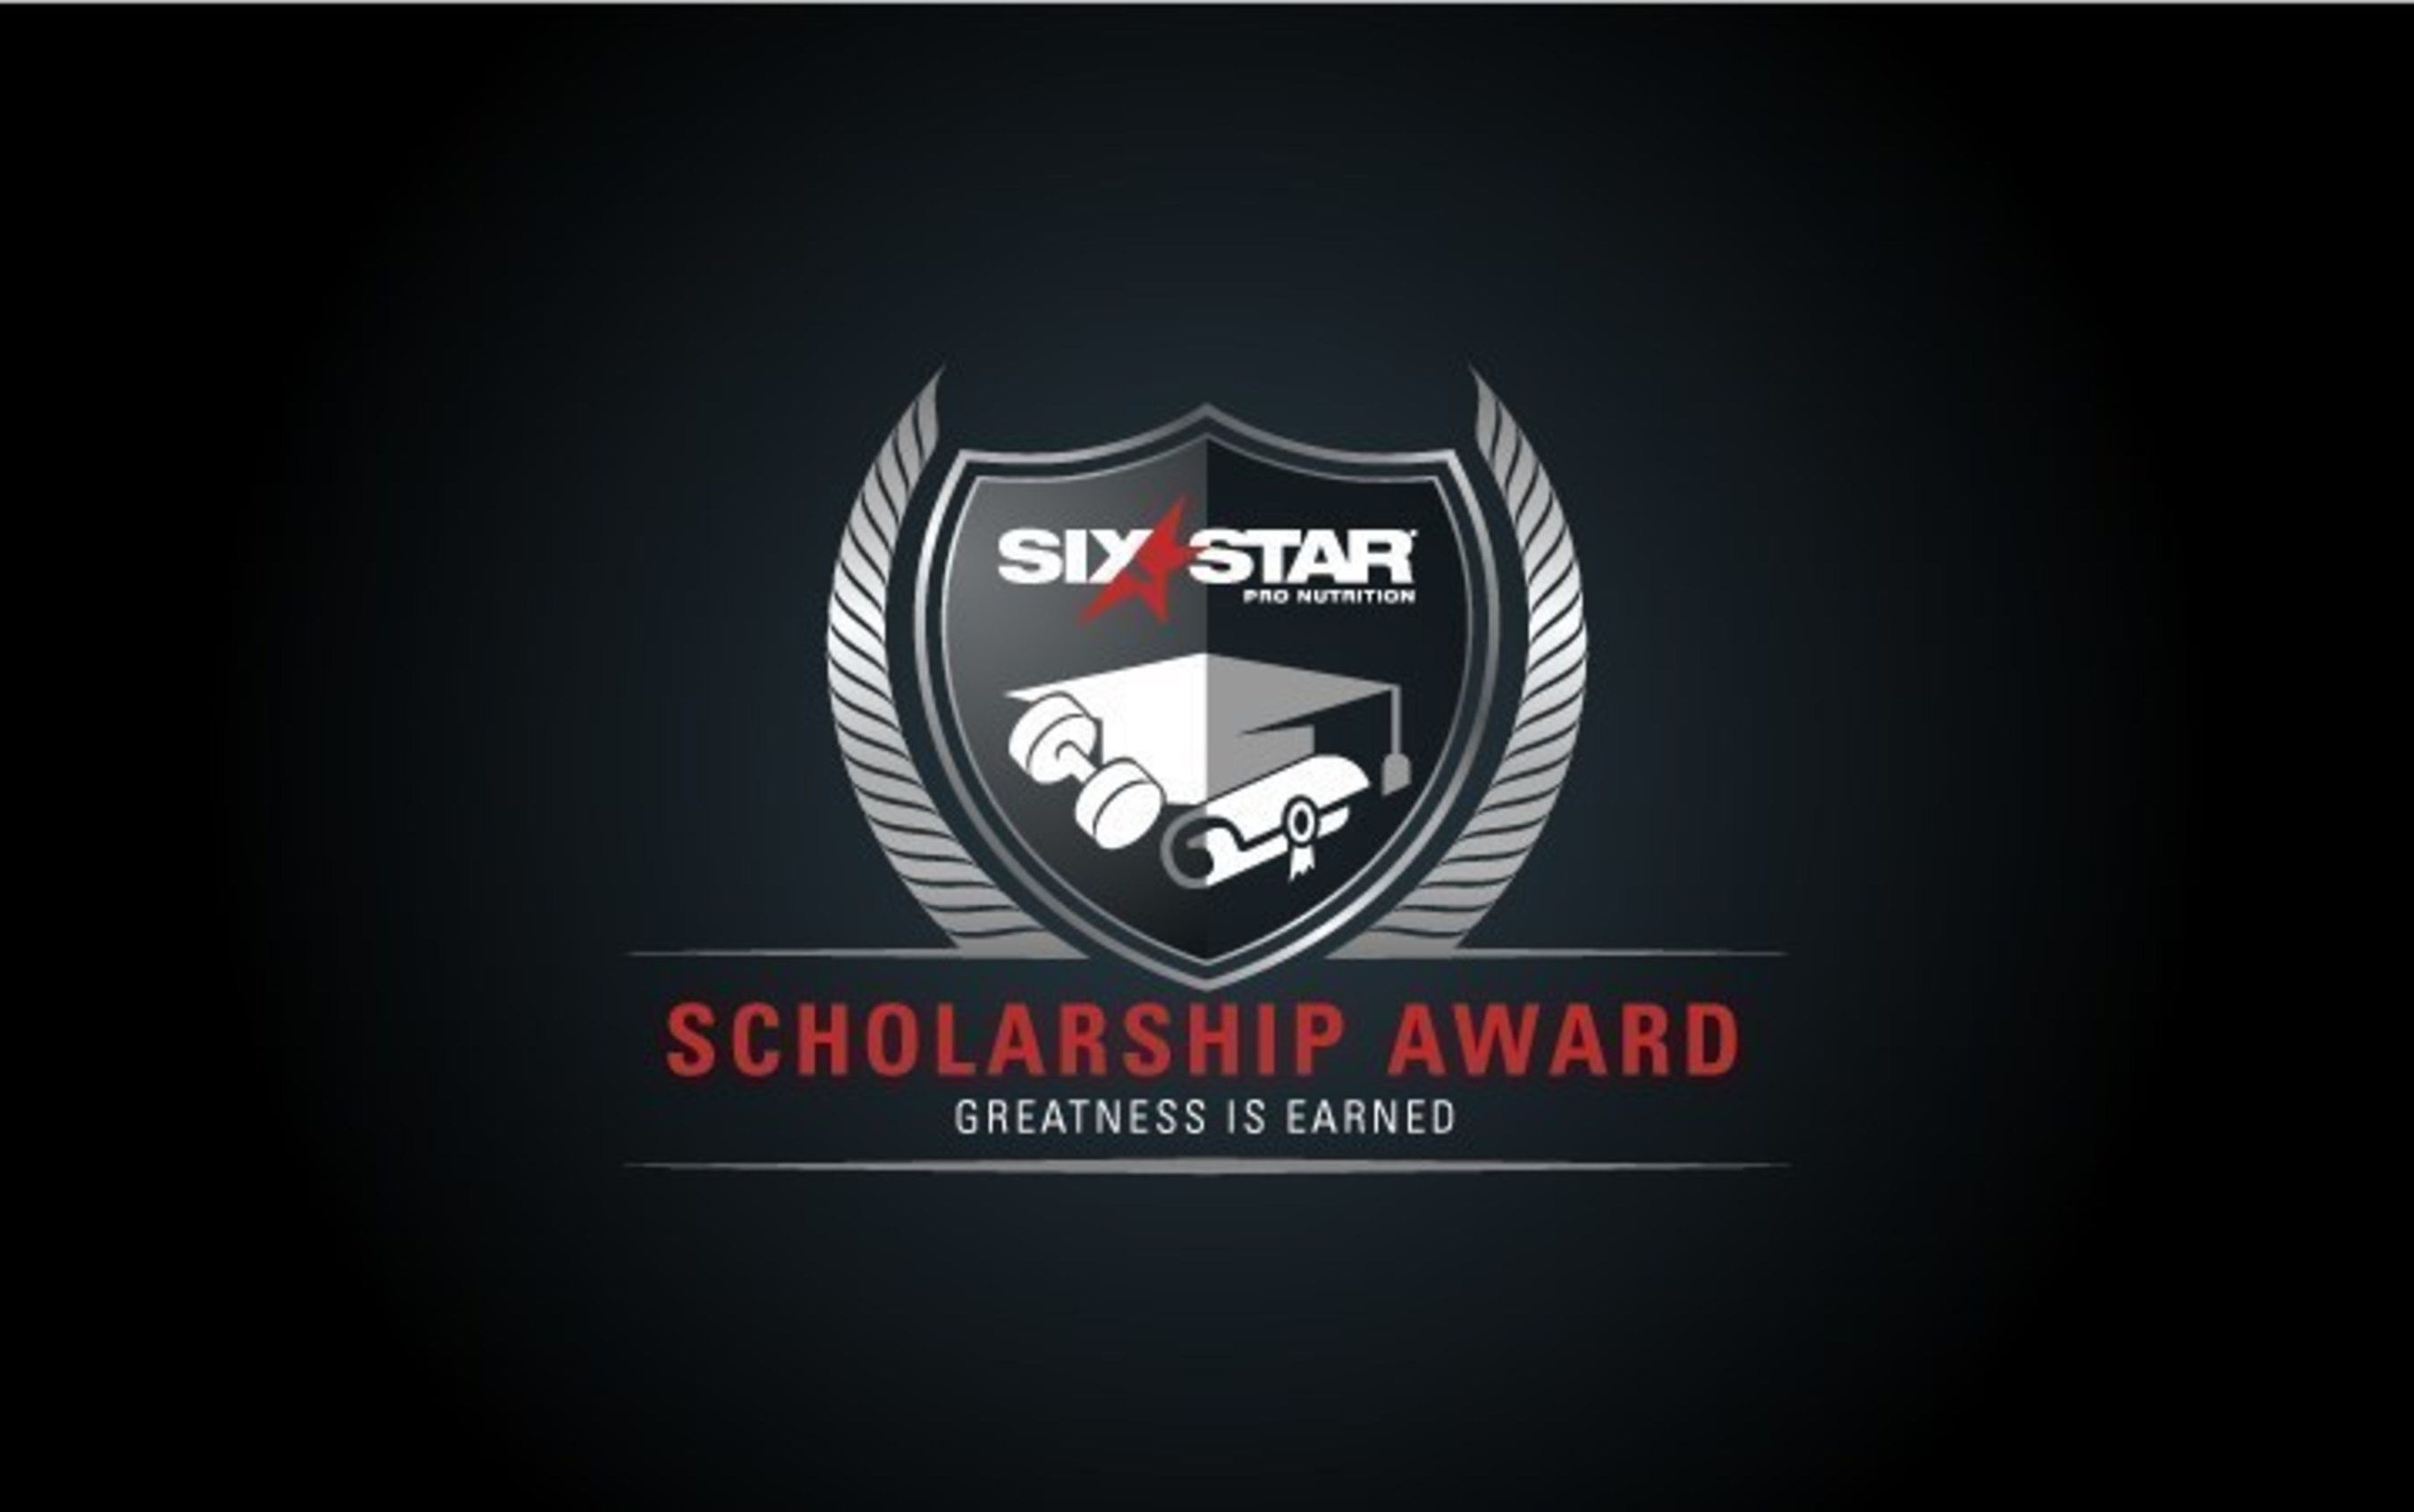 SIX STAR PRO NUTRITION(R) LAUNCHES "GREATNESS IS EARNED" NATIONAL SCHOLARSHIP AWARD.